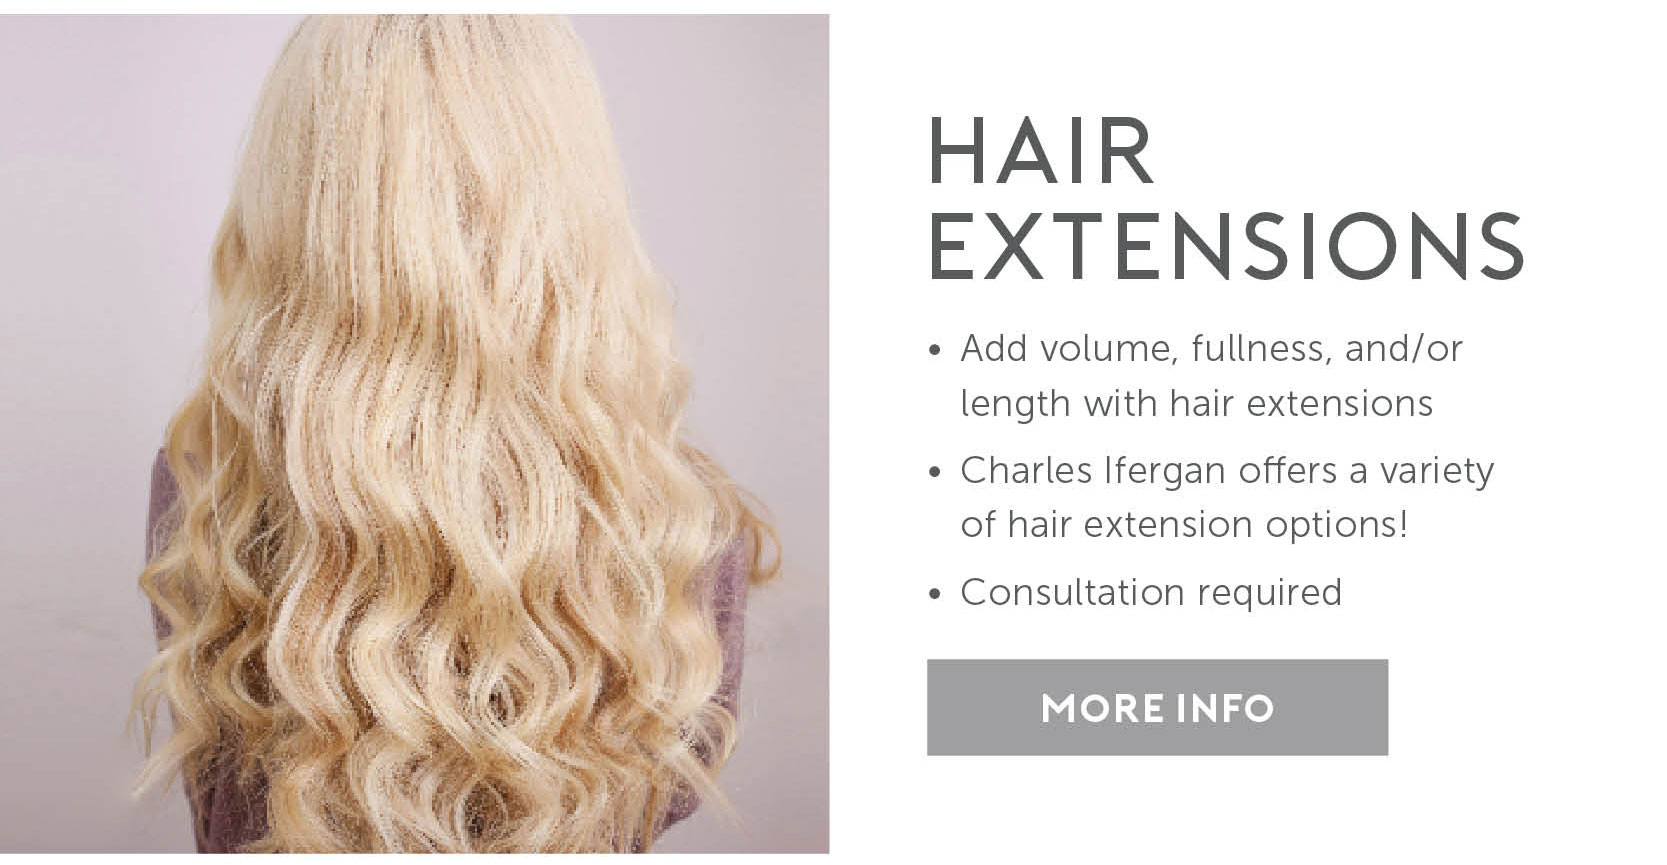 Hair Extensions. Add volume, fullness and or length with hair extensions. Charles Ifergan offers a variety of hair extension options! Consultation required. Click here for more info. 